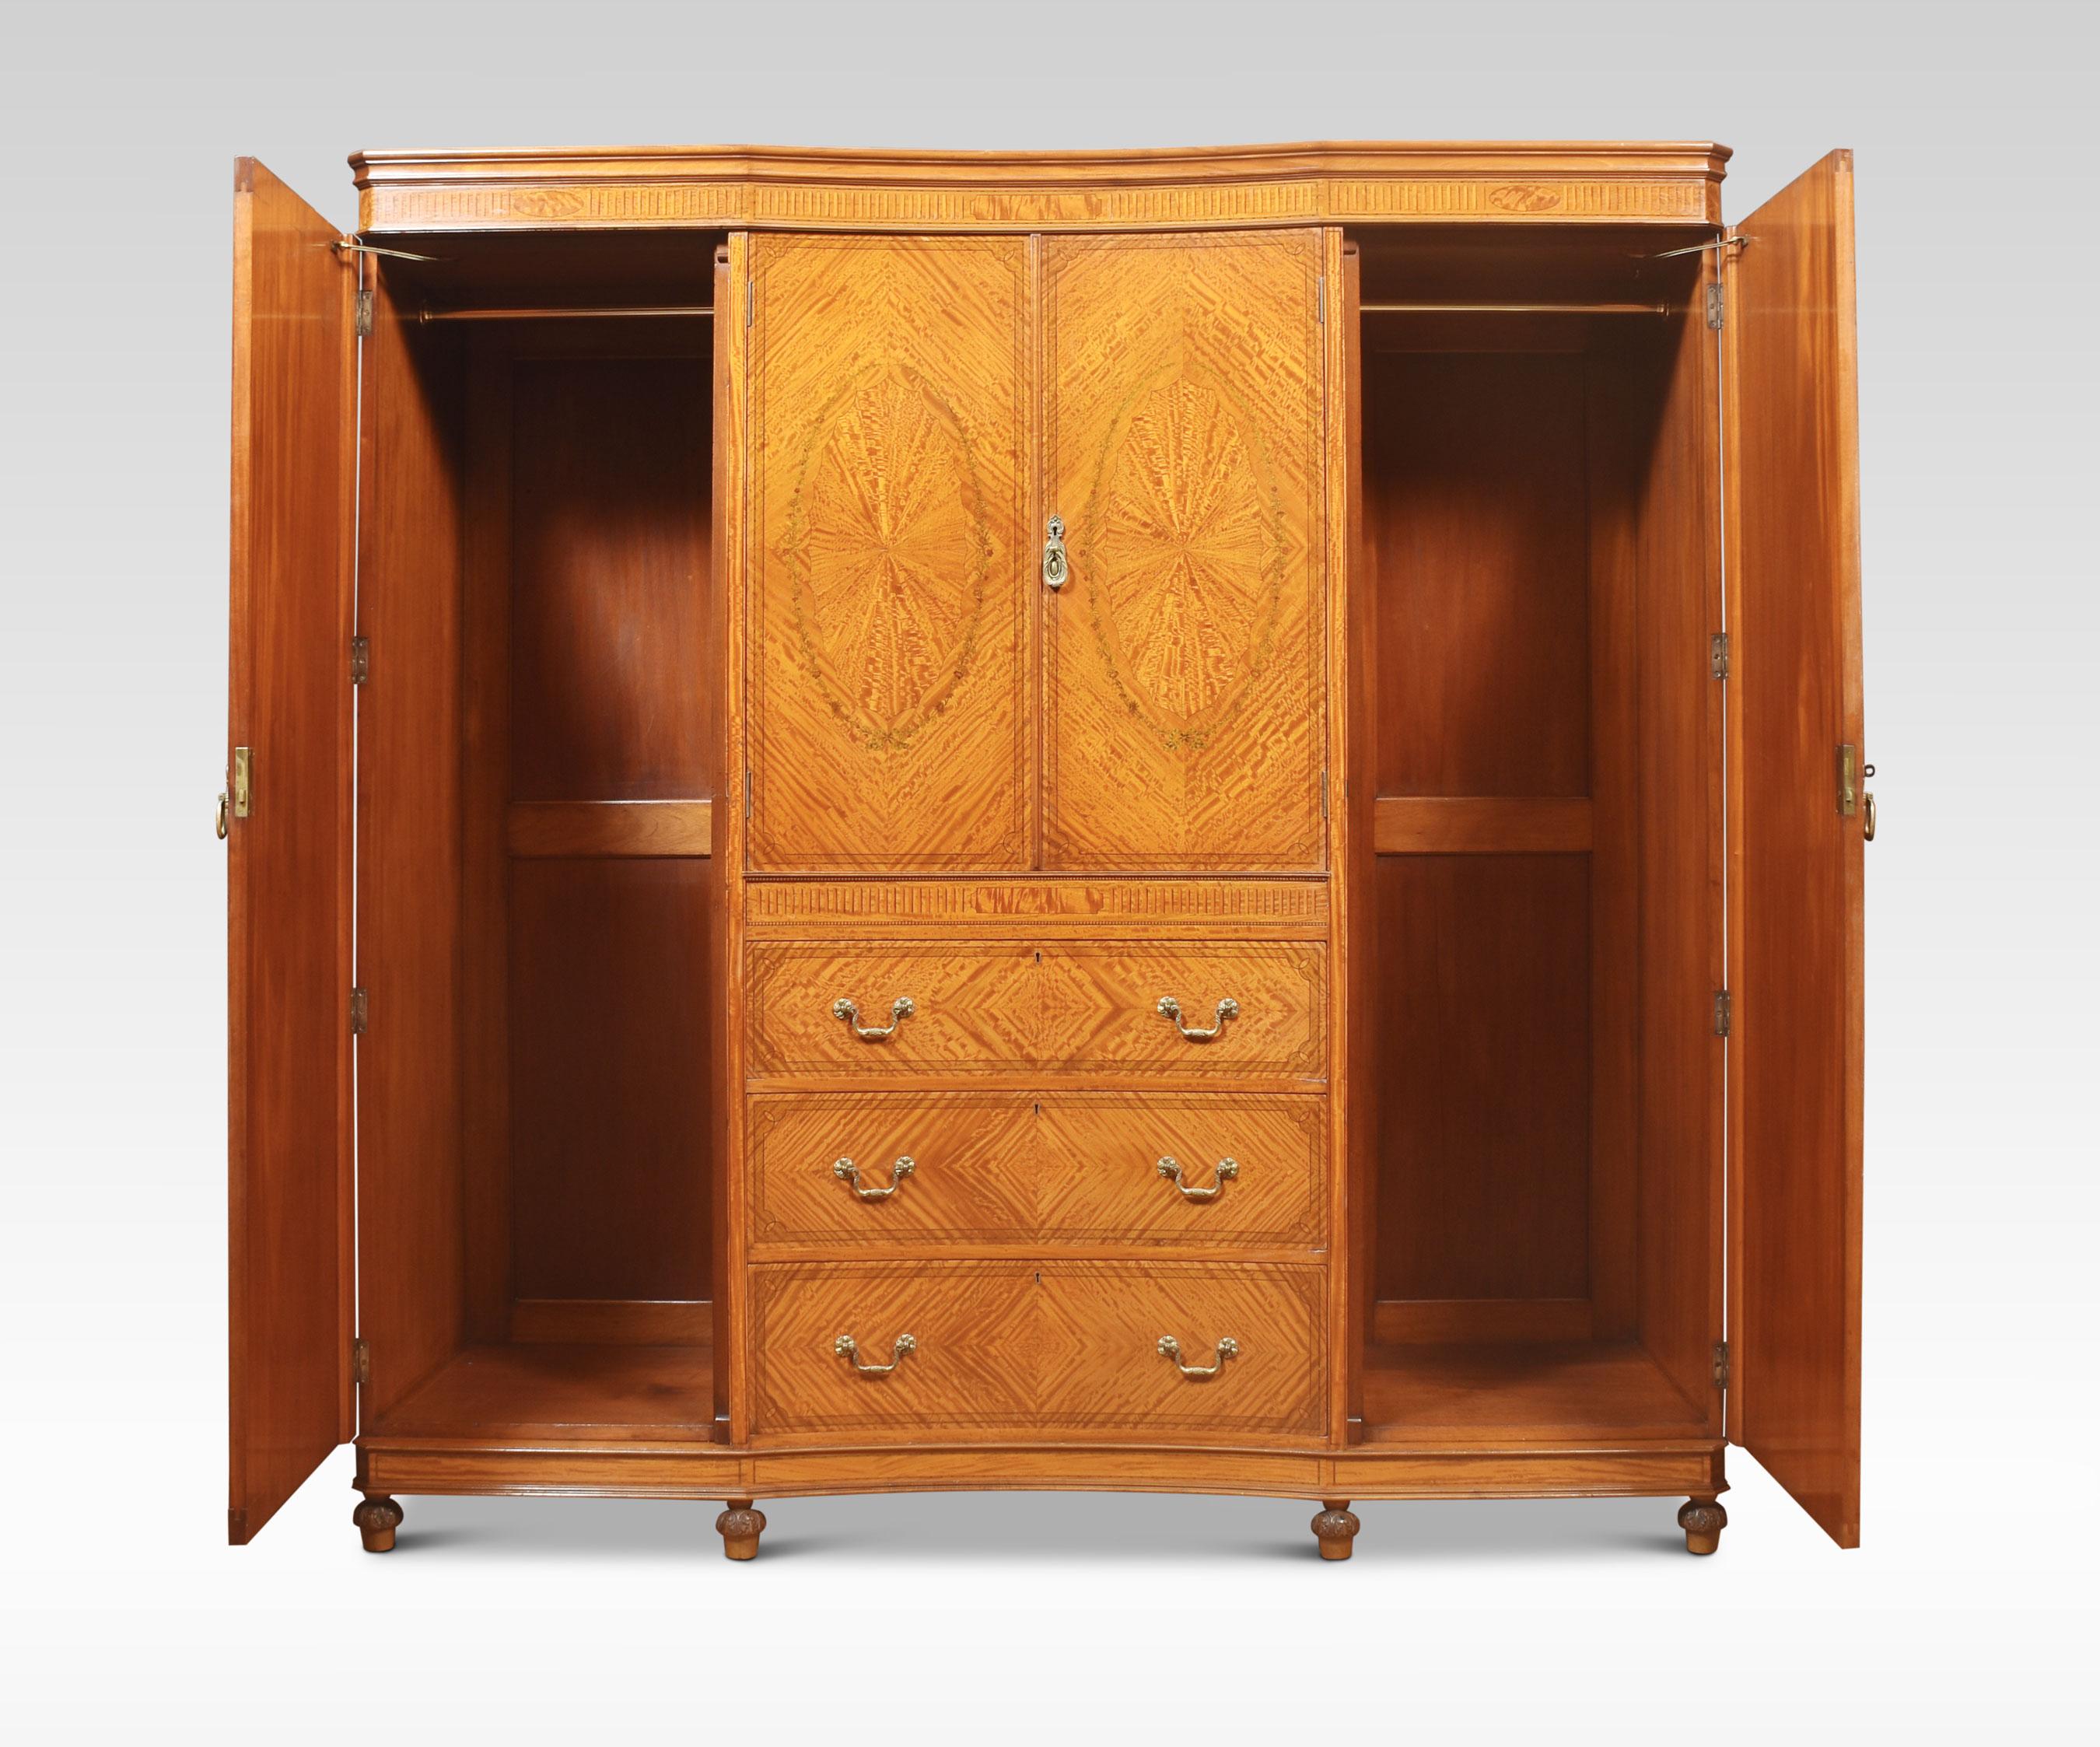 Late 19th century Sheraton Revival compactum wardrobe, the detachable decorated concaved cornice above a central cupboard fitted with hanging rail enclosed by a pair of floral inlaid panel doors. Above a secret drawer and three long graduated